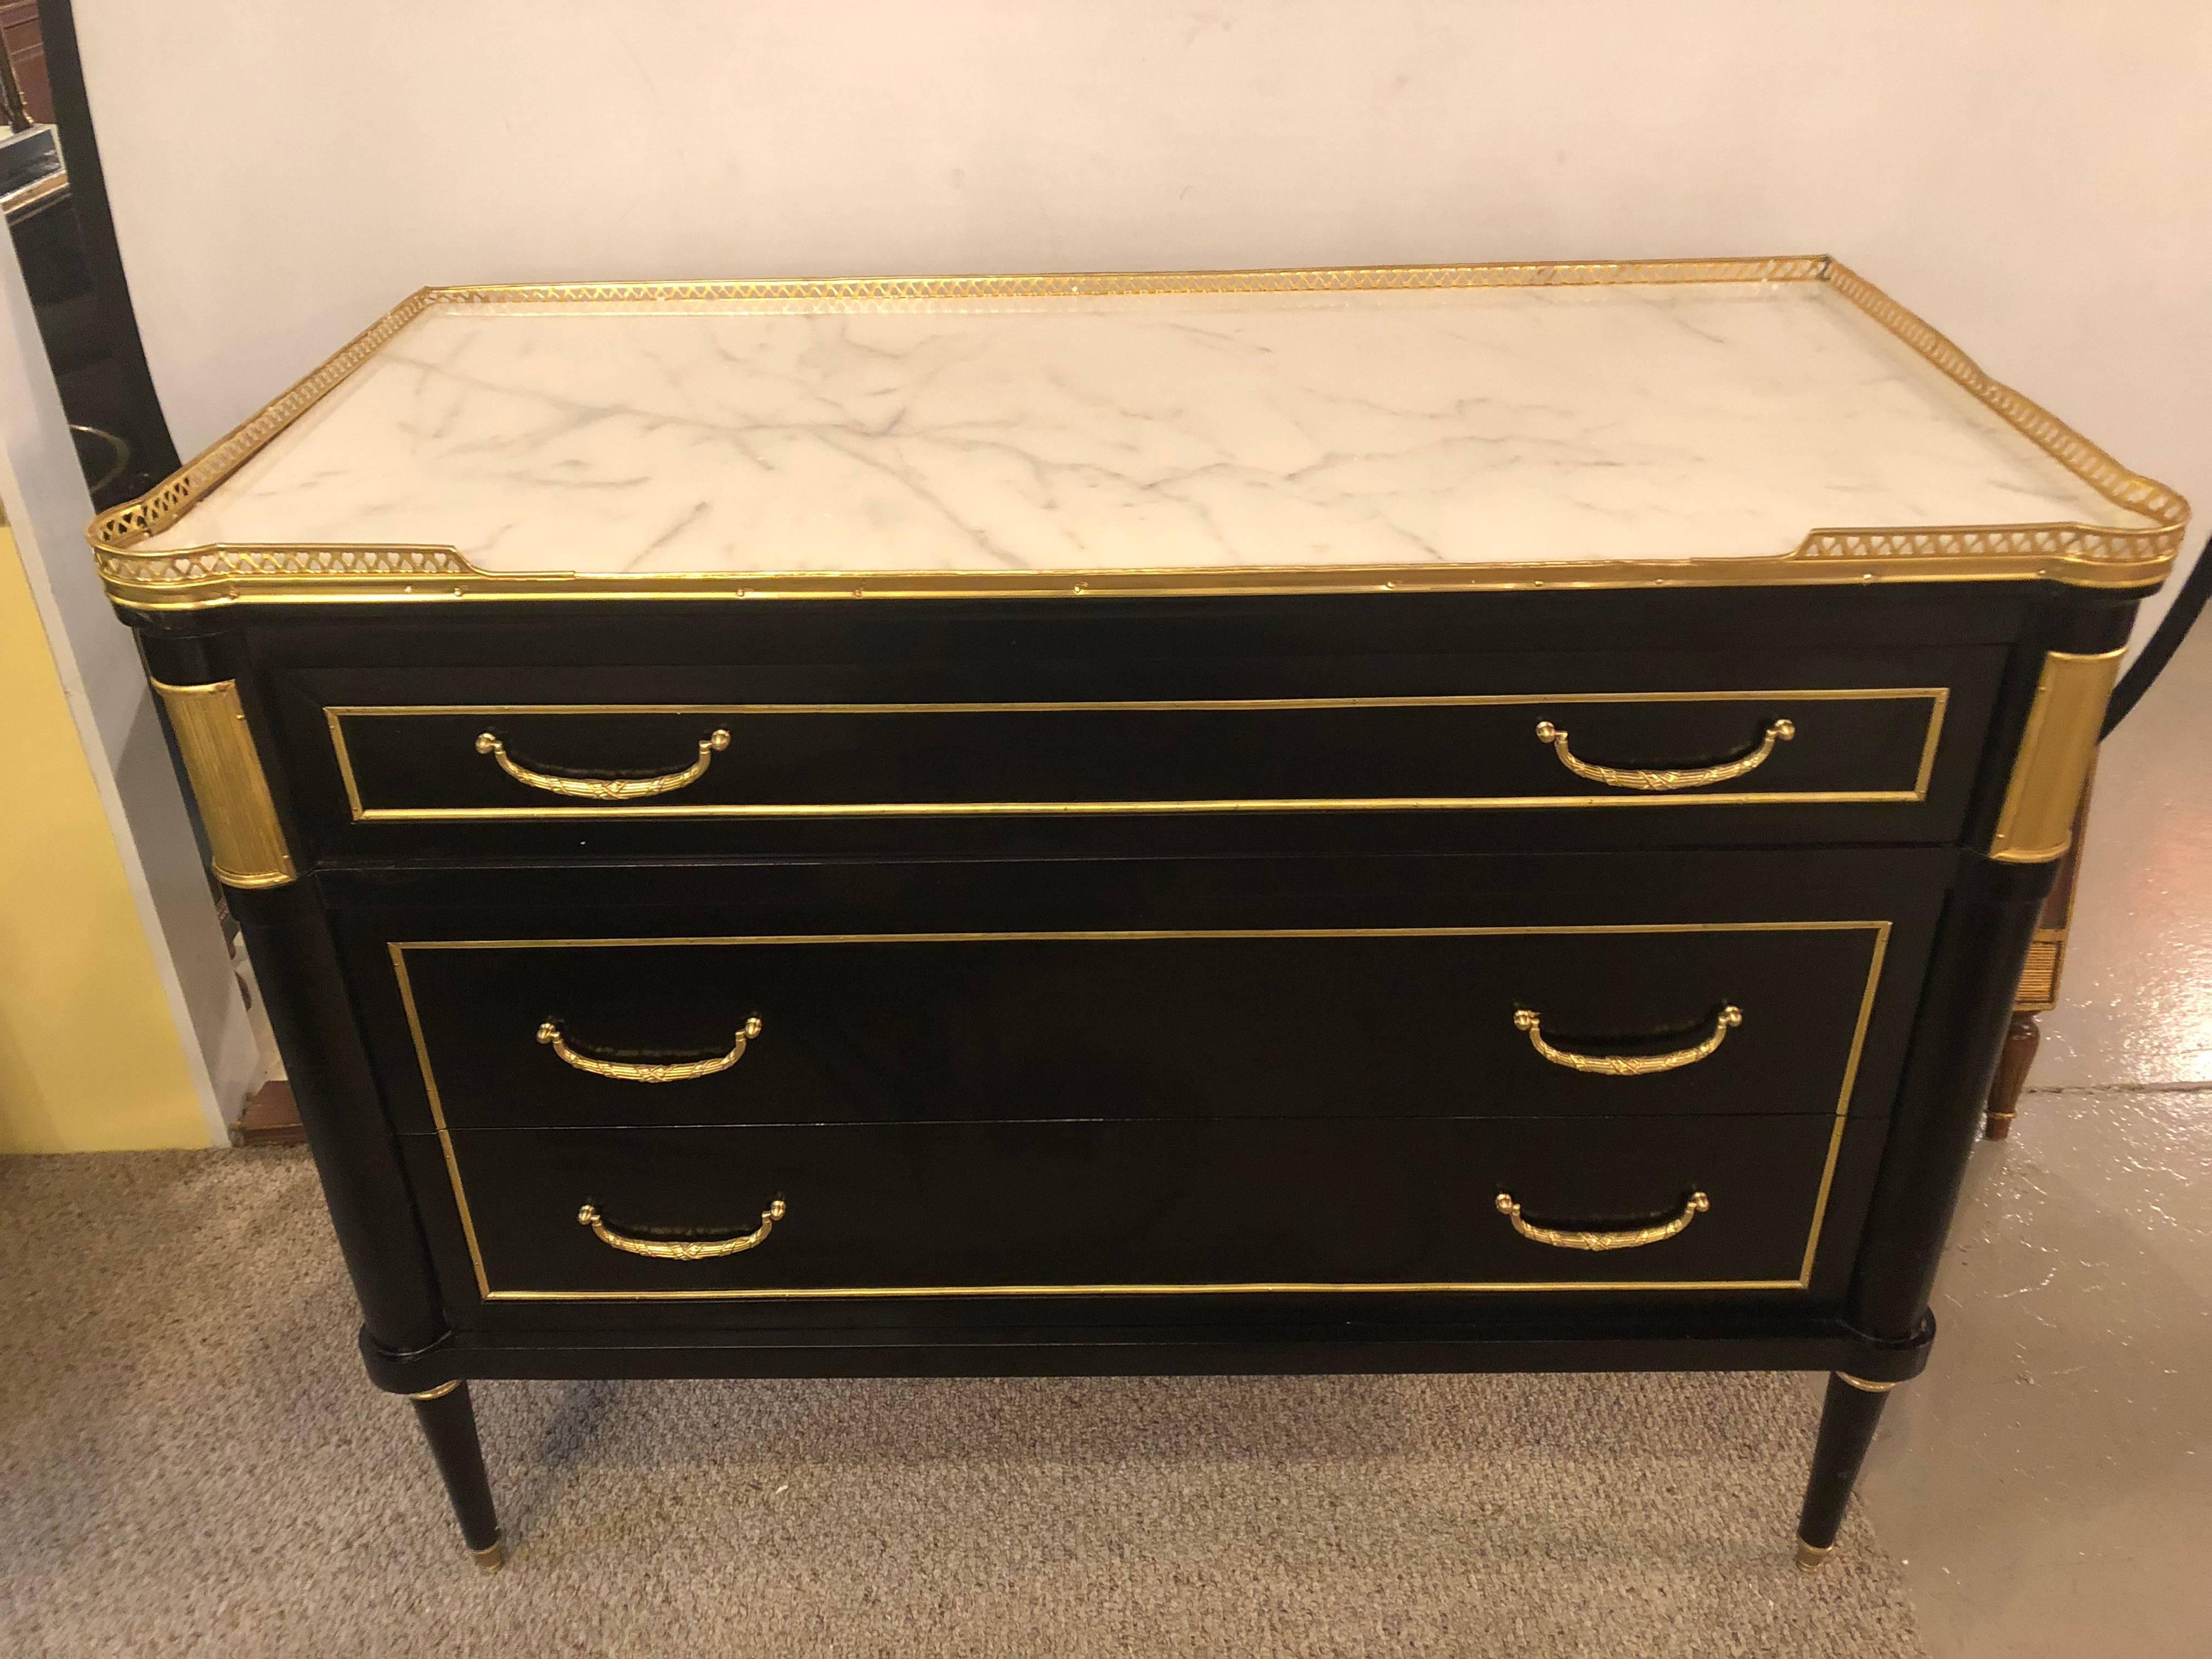 A fine pair of custom quality ebonized Louis XVI Hollywood Regency style commodes or nightstands in the manner Maison Jansen. Simply the finest in style, look, design and quality come this pair of ebony marble top commodes. The white Carrera marble